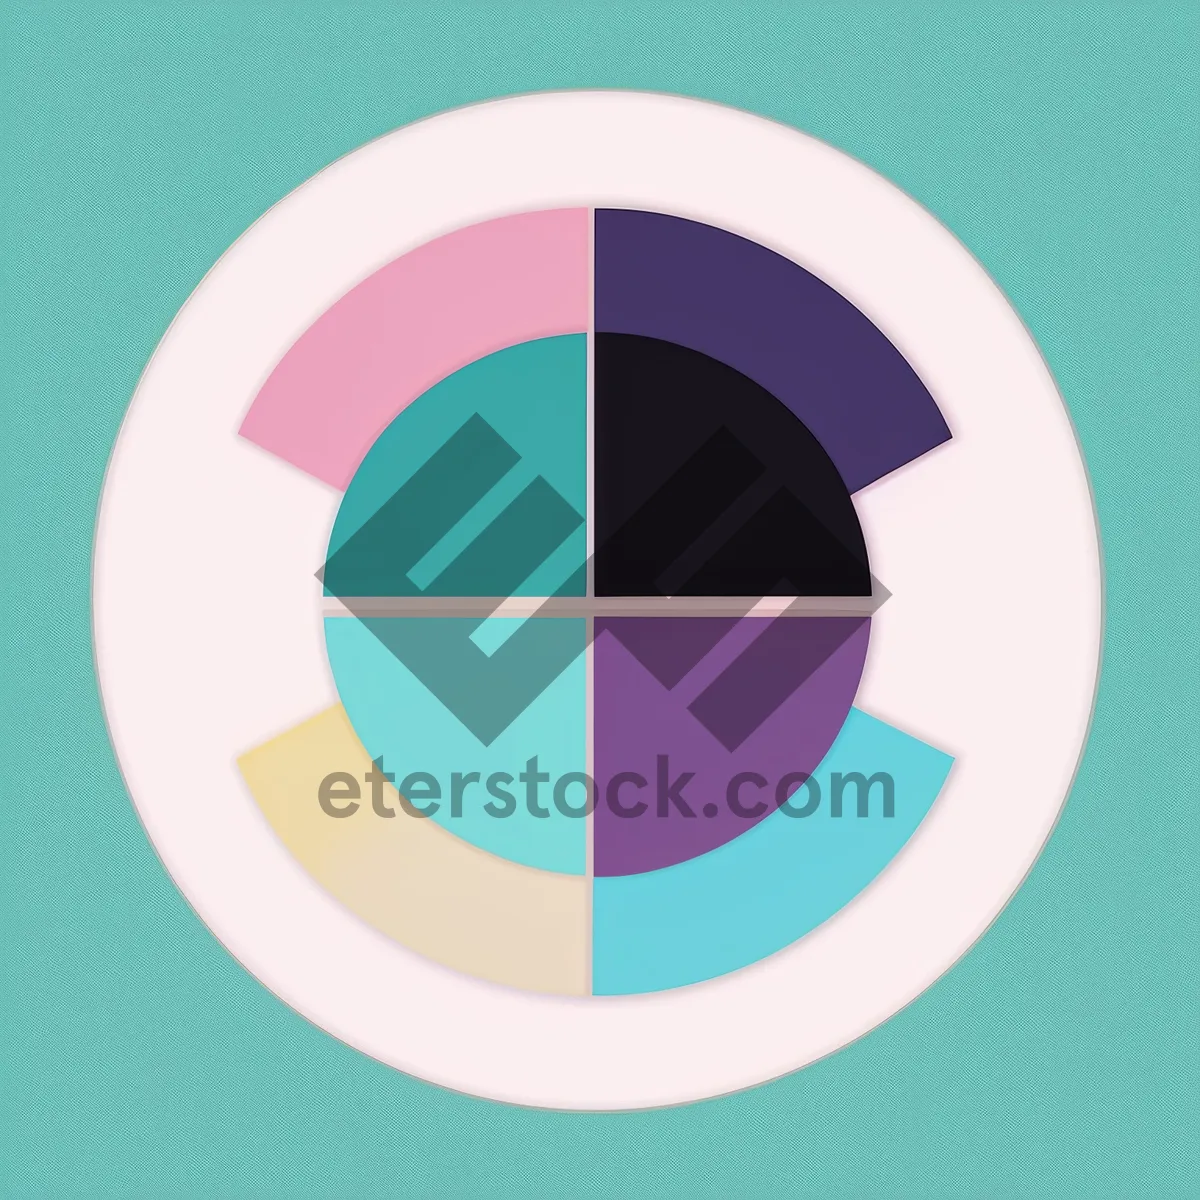 Picture of Shiny Round Logo Button with Circle Design